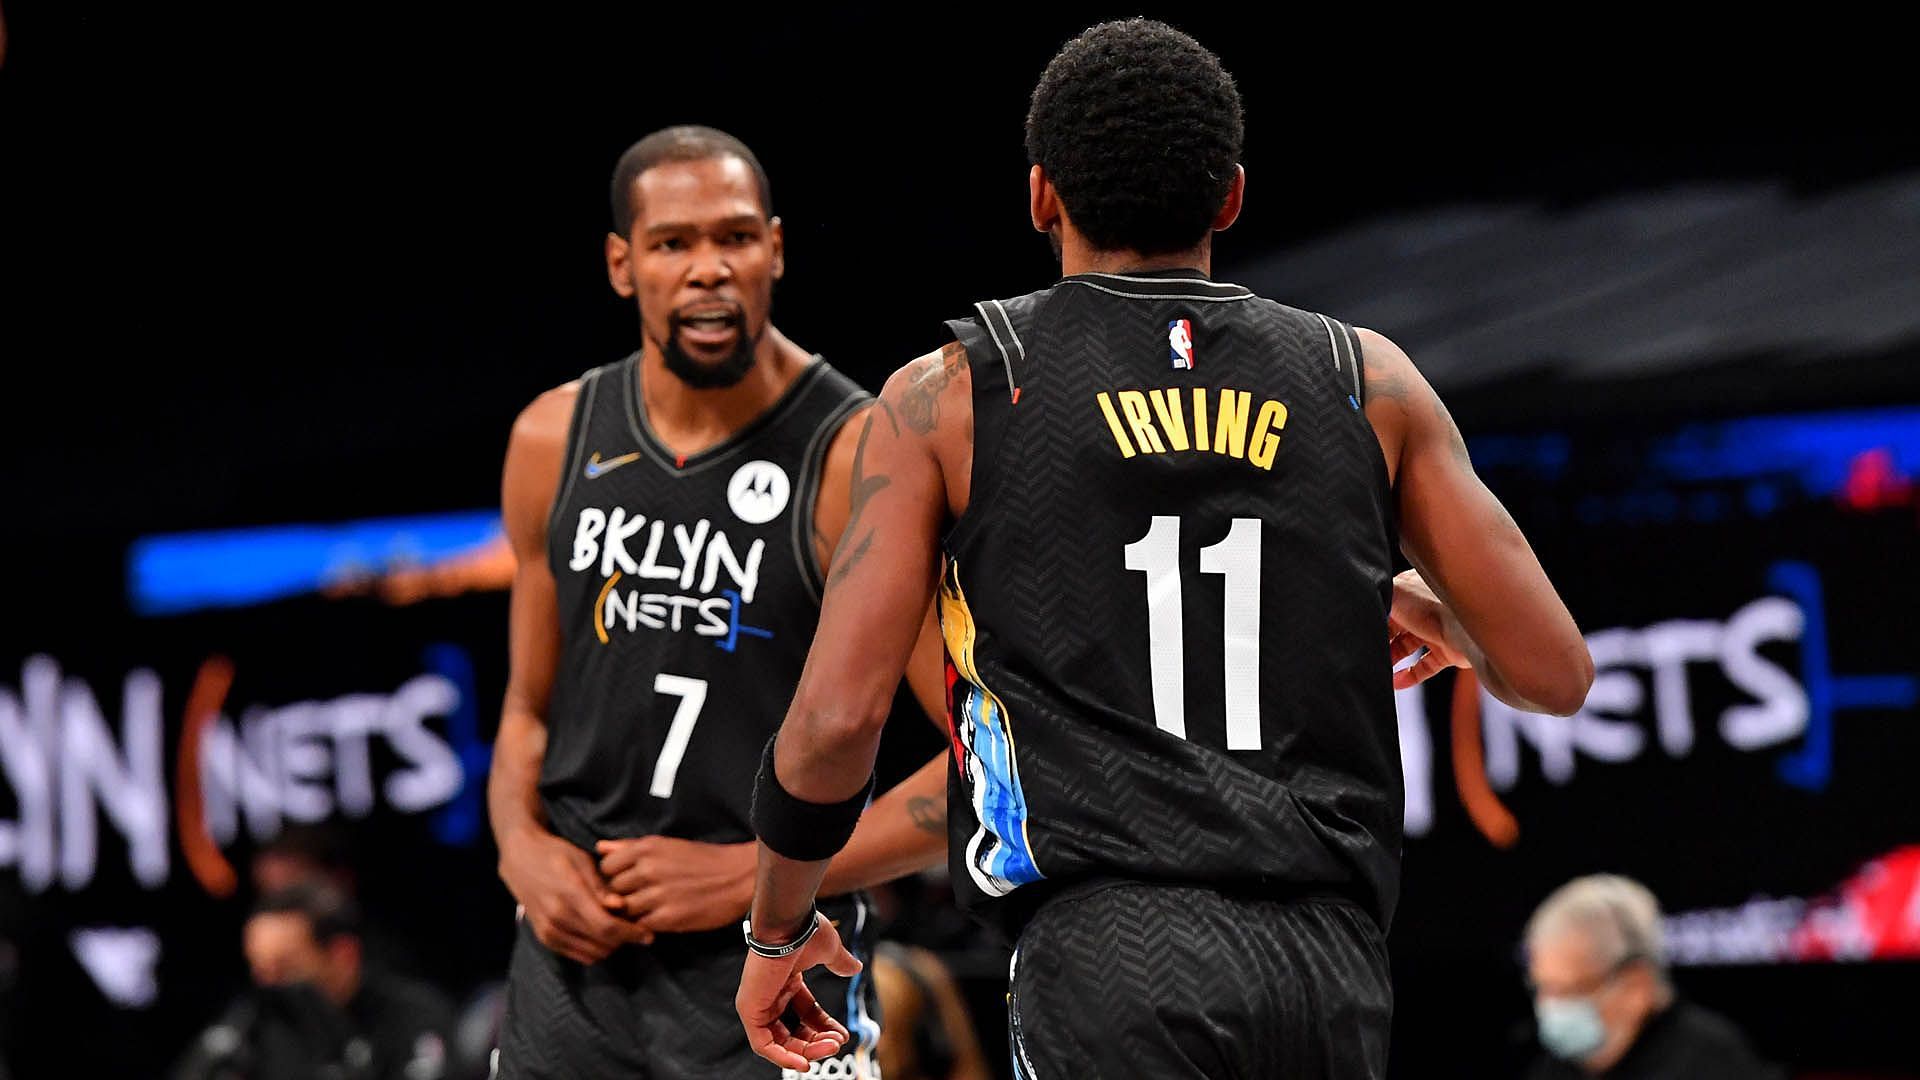 Kyrie Irving and Kevin Durant will be looking to carry the Brooklyn Nets to the postseason via the play-in tournament. [NBA.com]